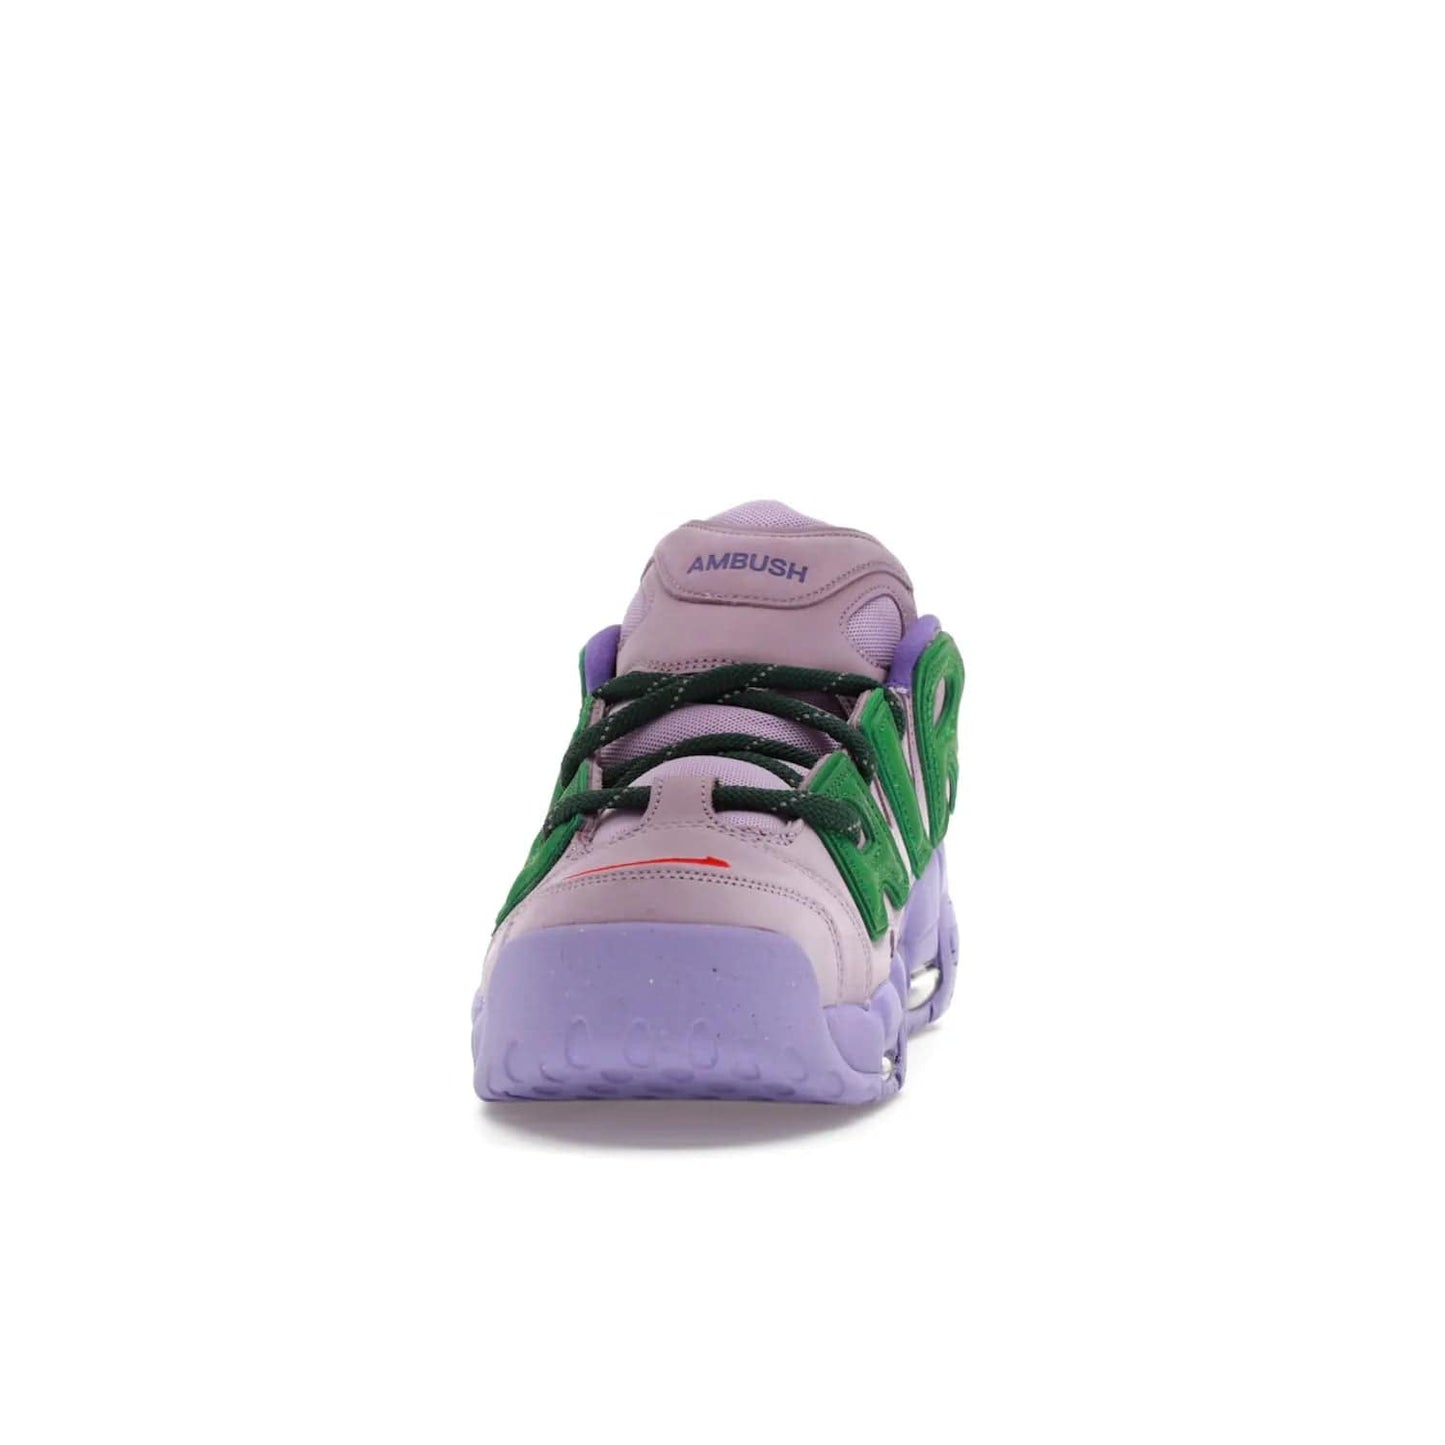 Nike Air More Uptempo Low AMBUSH Lilac - Image 11 - Only at www.BallersClubKickz.com - Style and comfort meet with the Nike Air More Uptempo Low AMBUSH Lilac. Featuring a vibrant Lilac upper with Apple Green and University Red accents, this unique design will be a standout in any wardrobe. Get your pair on October 06, 2023.